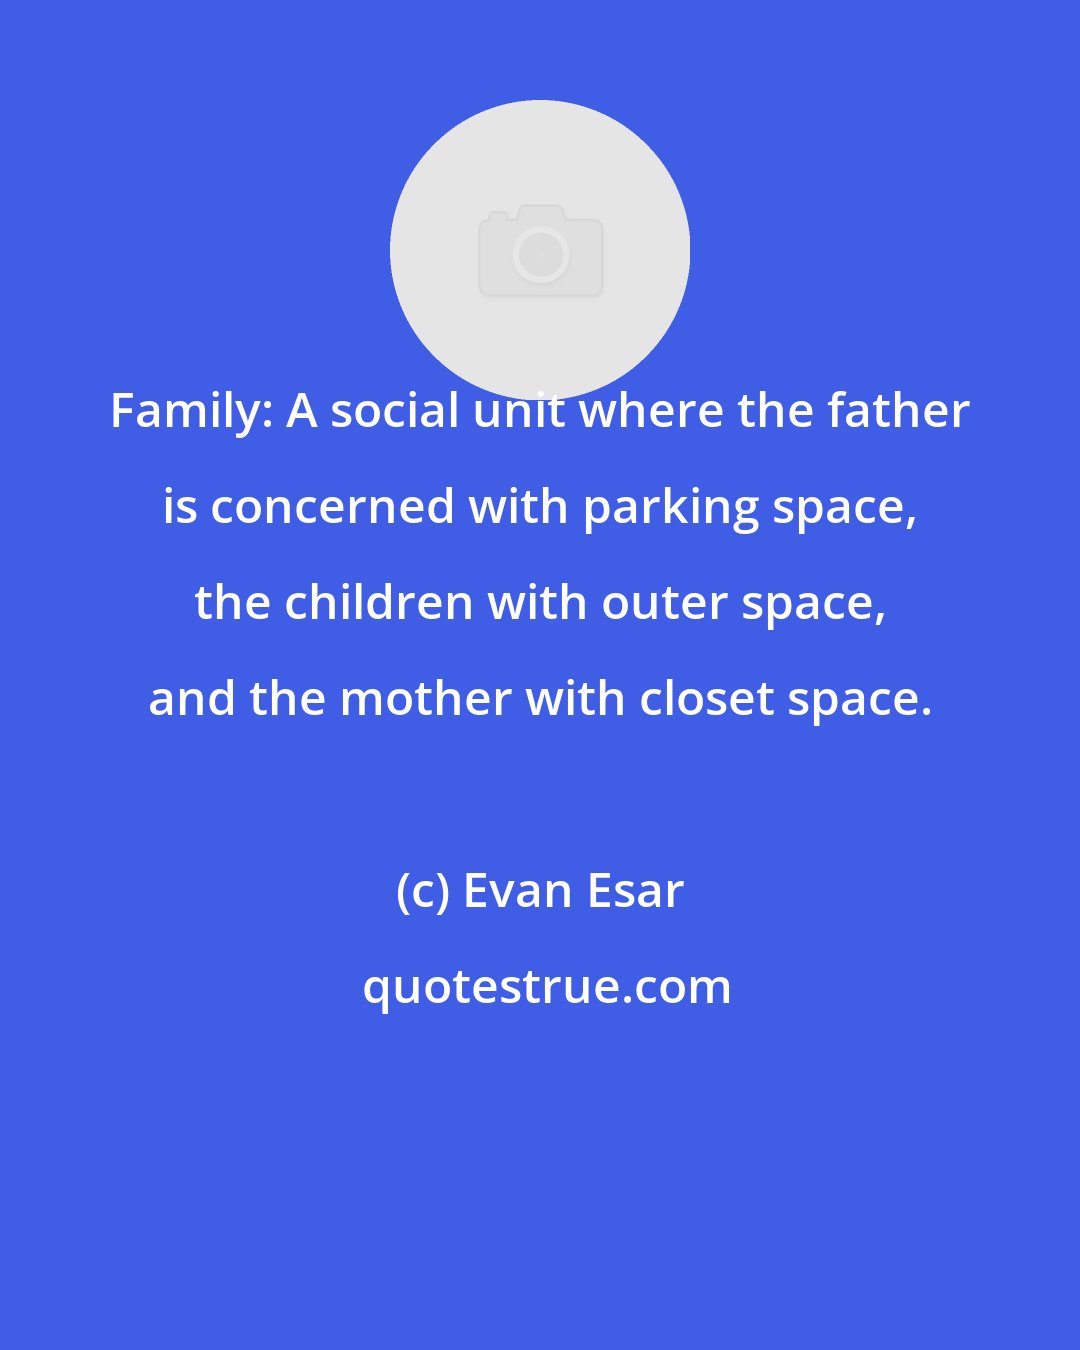 Evan Esar: Family: A social unit where the father is concerned with parking space, the children with outer space, and the mother with closet space.